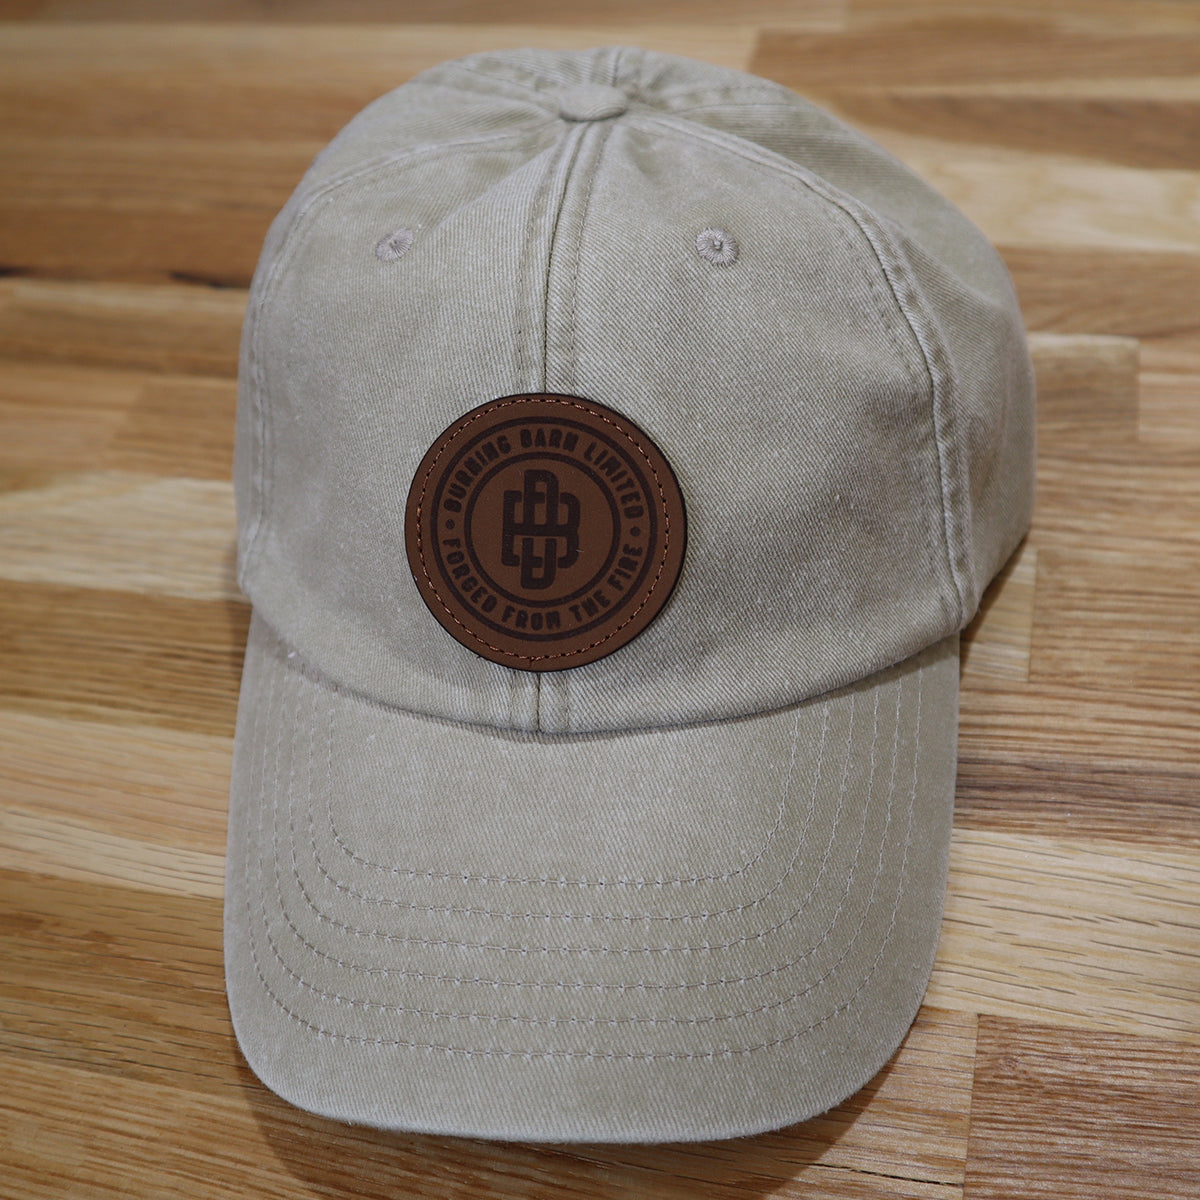 Front view of a grey cap with the Burning Barn logo on it